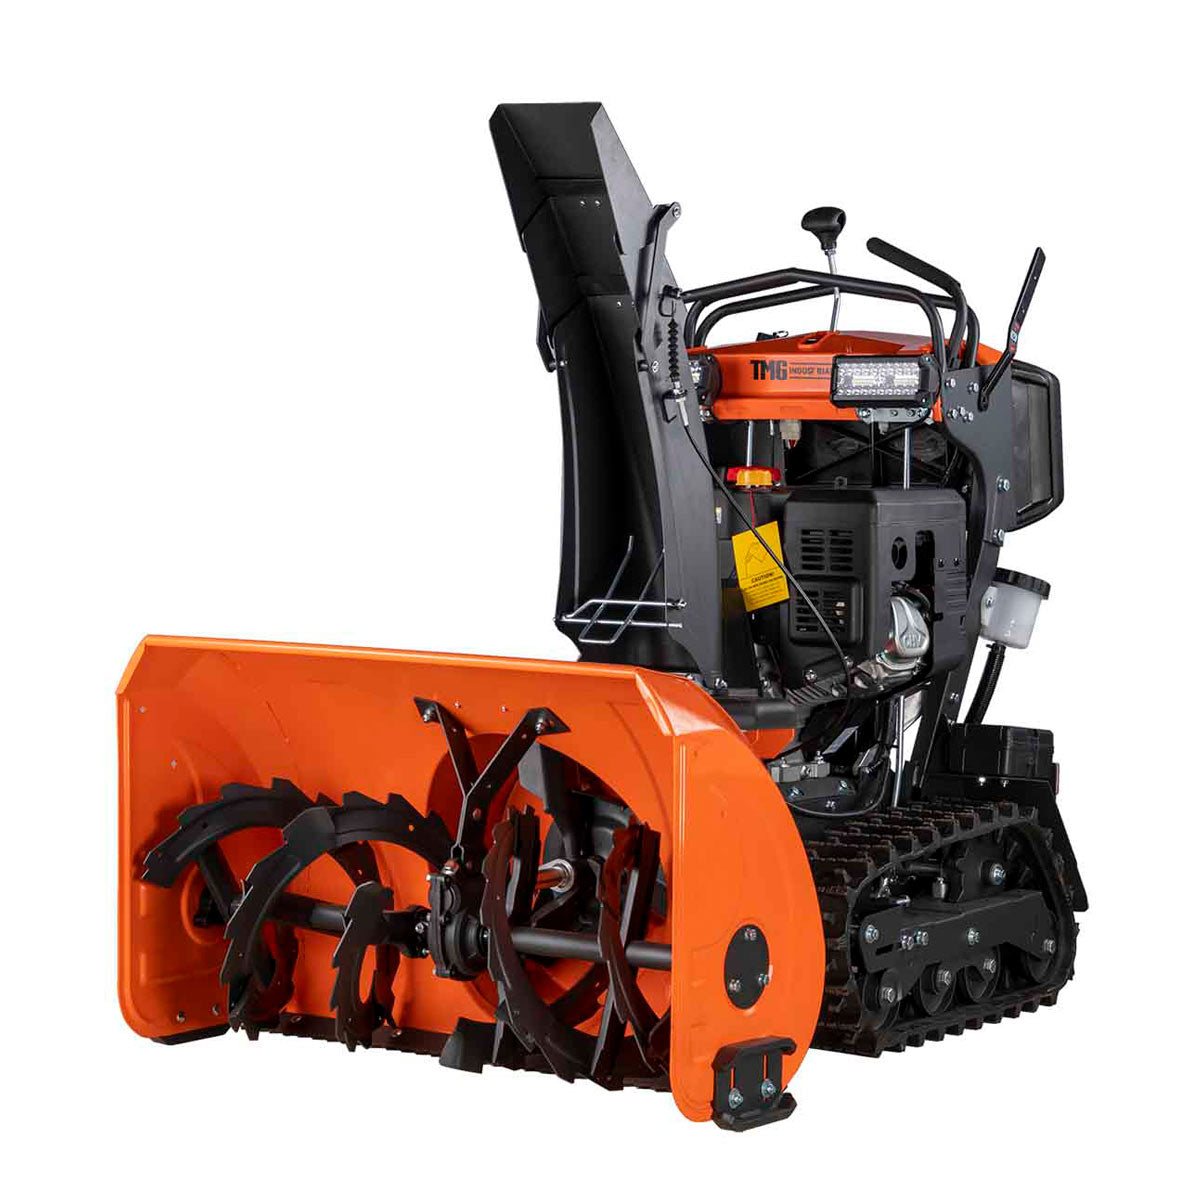 TMG Industrial 34” Stand-On Gas-Powered Snow Blower, Dual